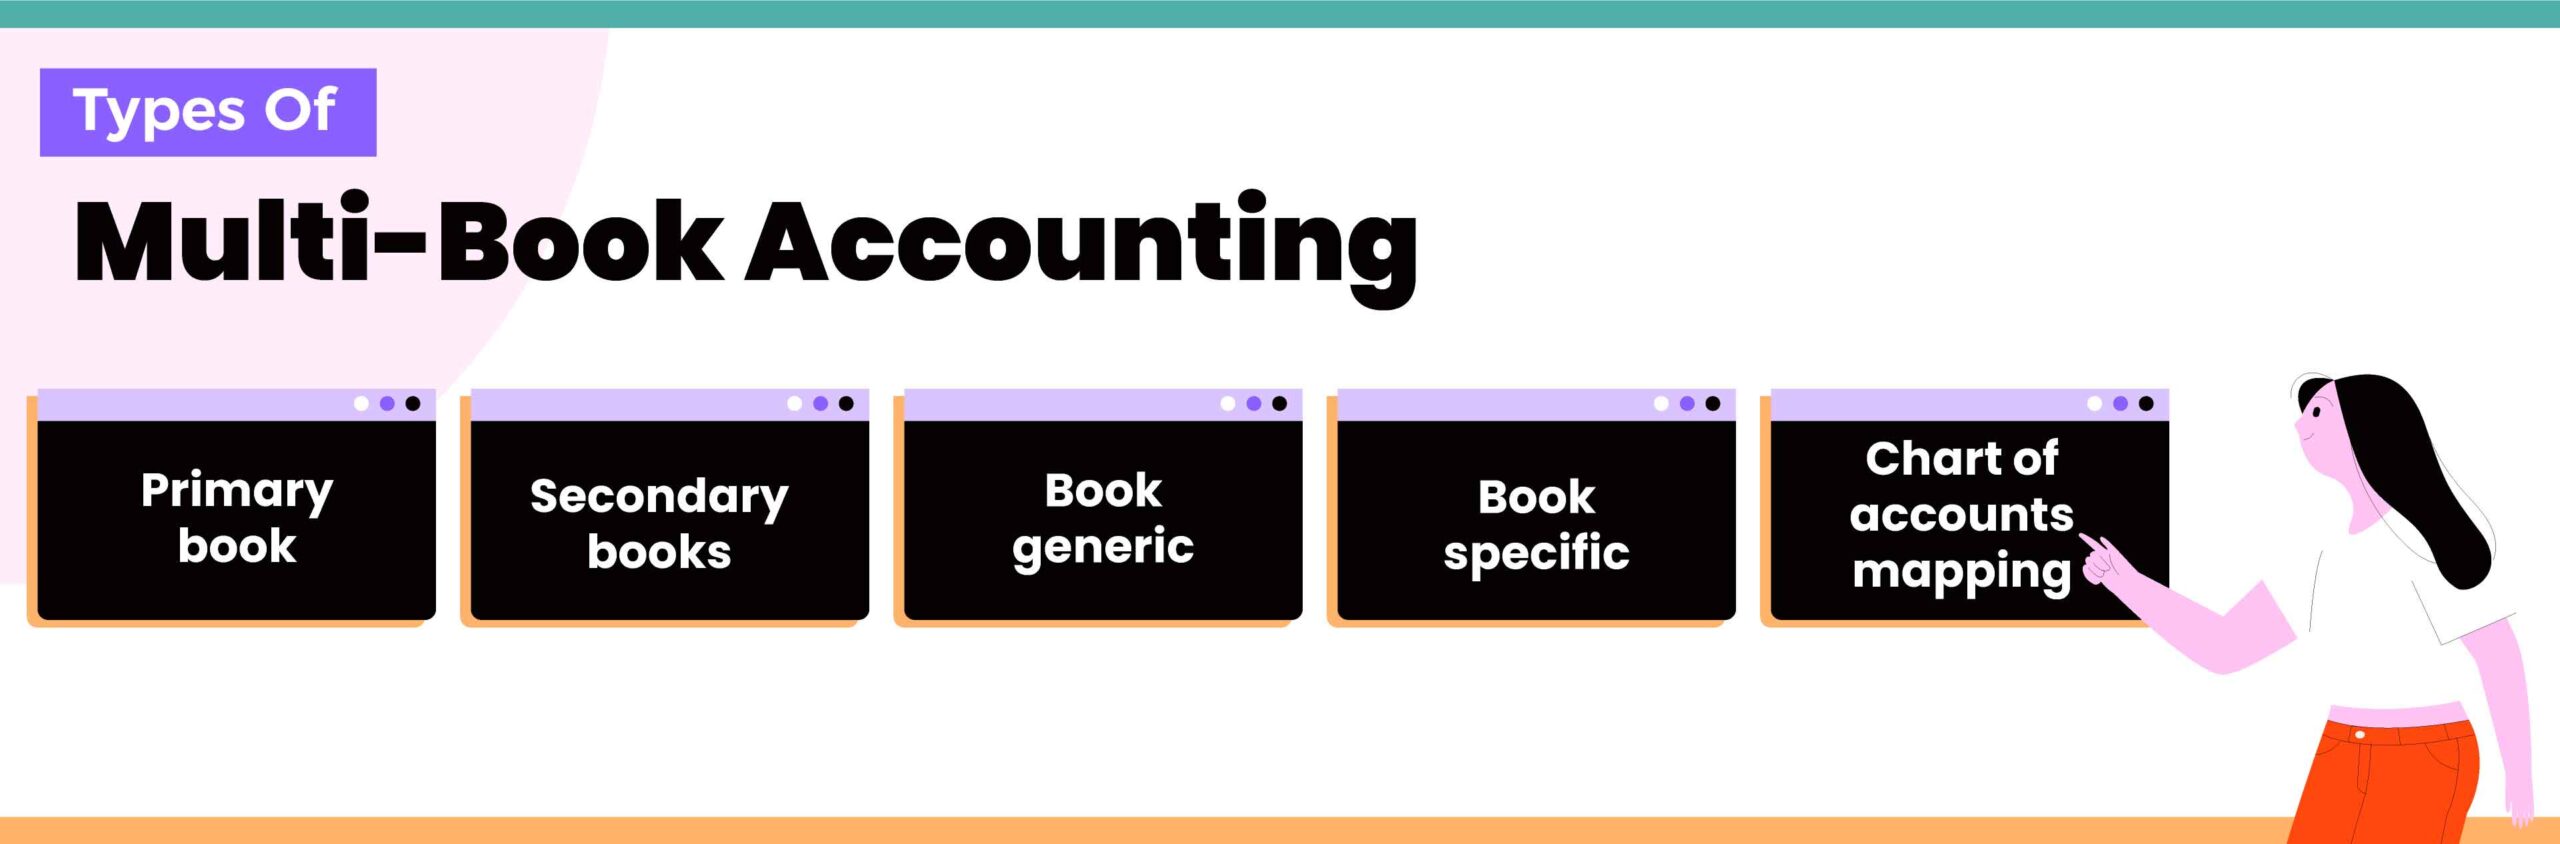 Types of Multibook accounting system